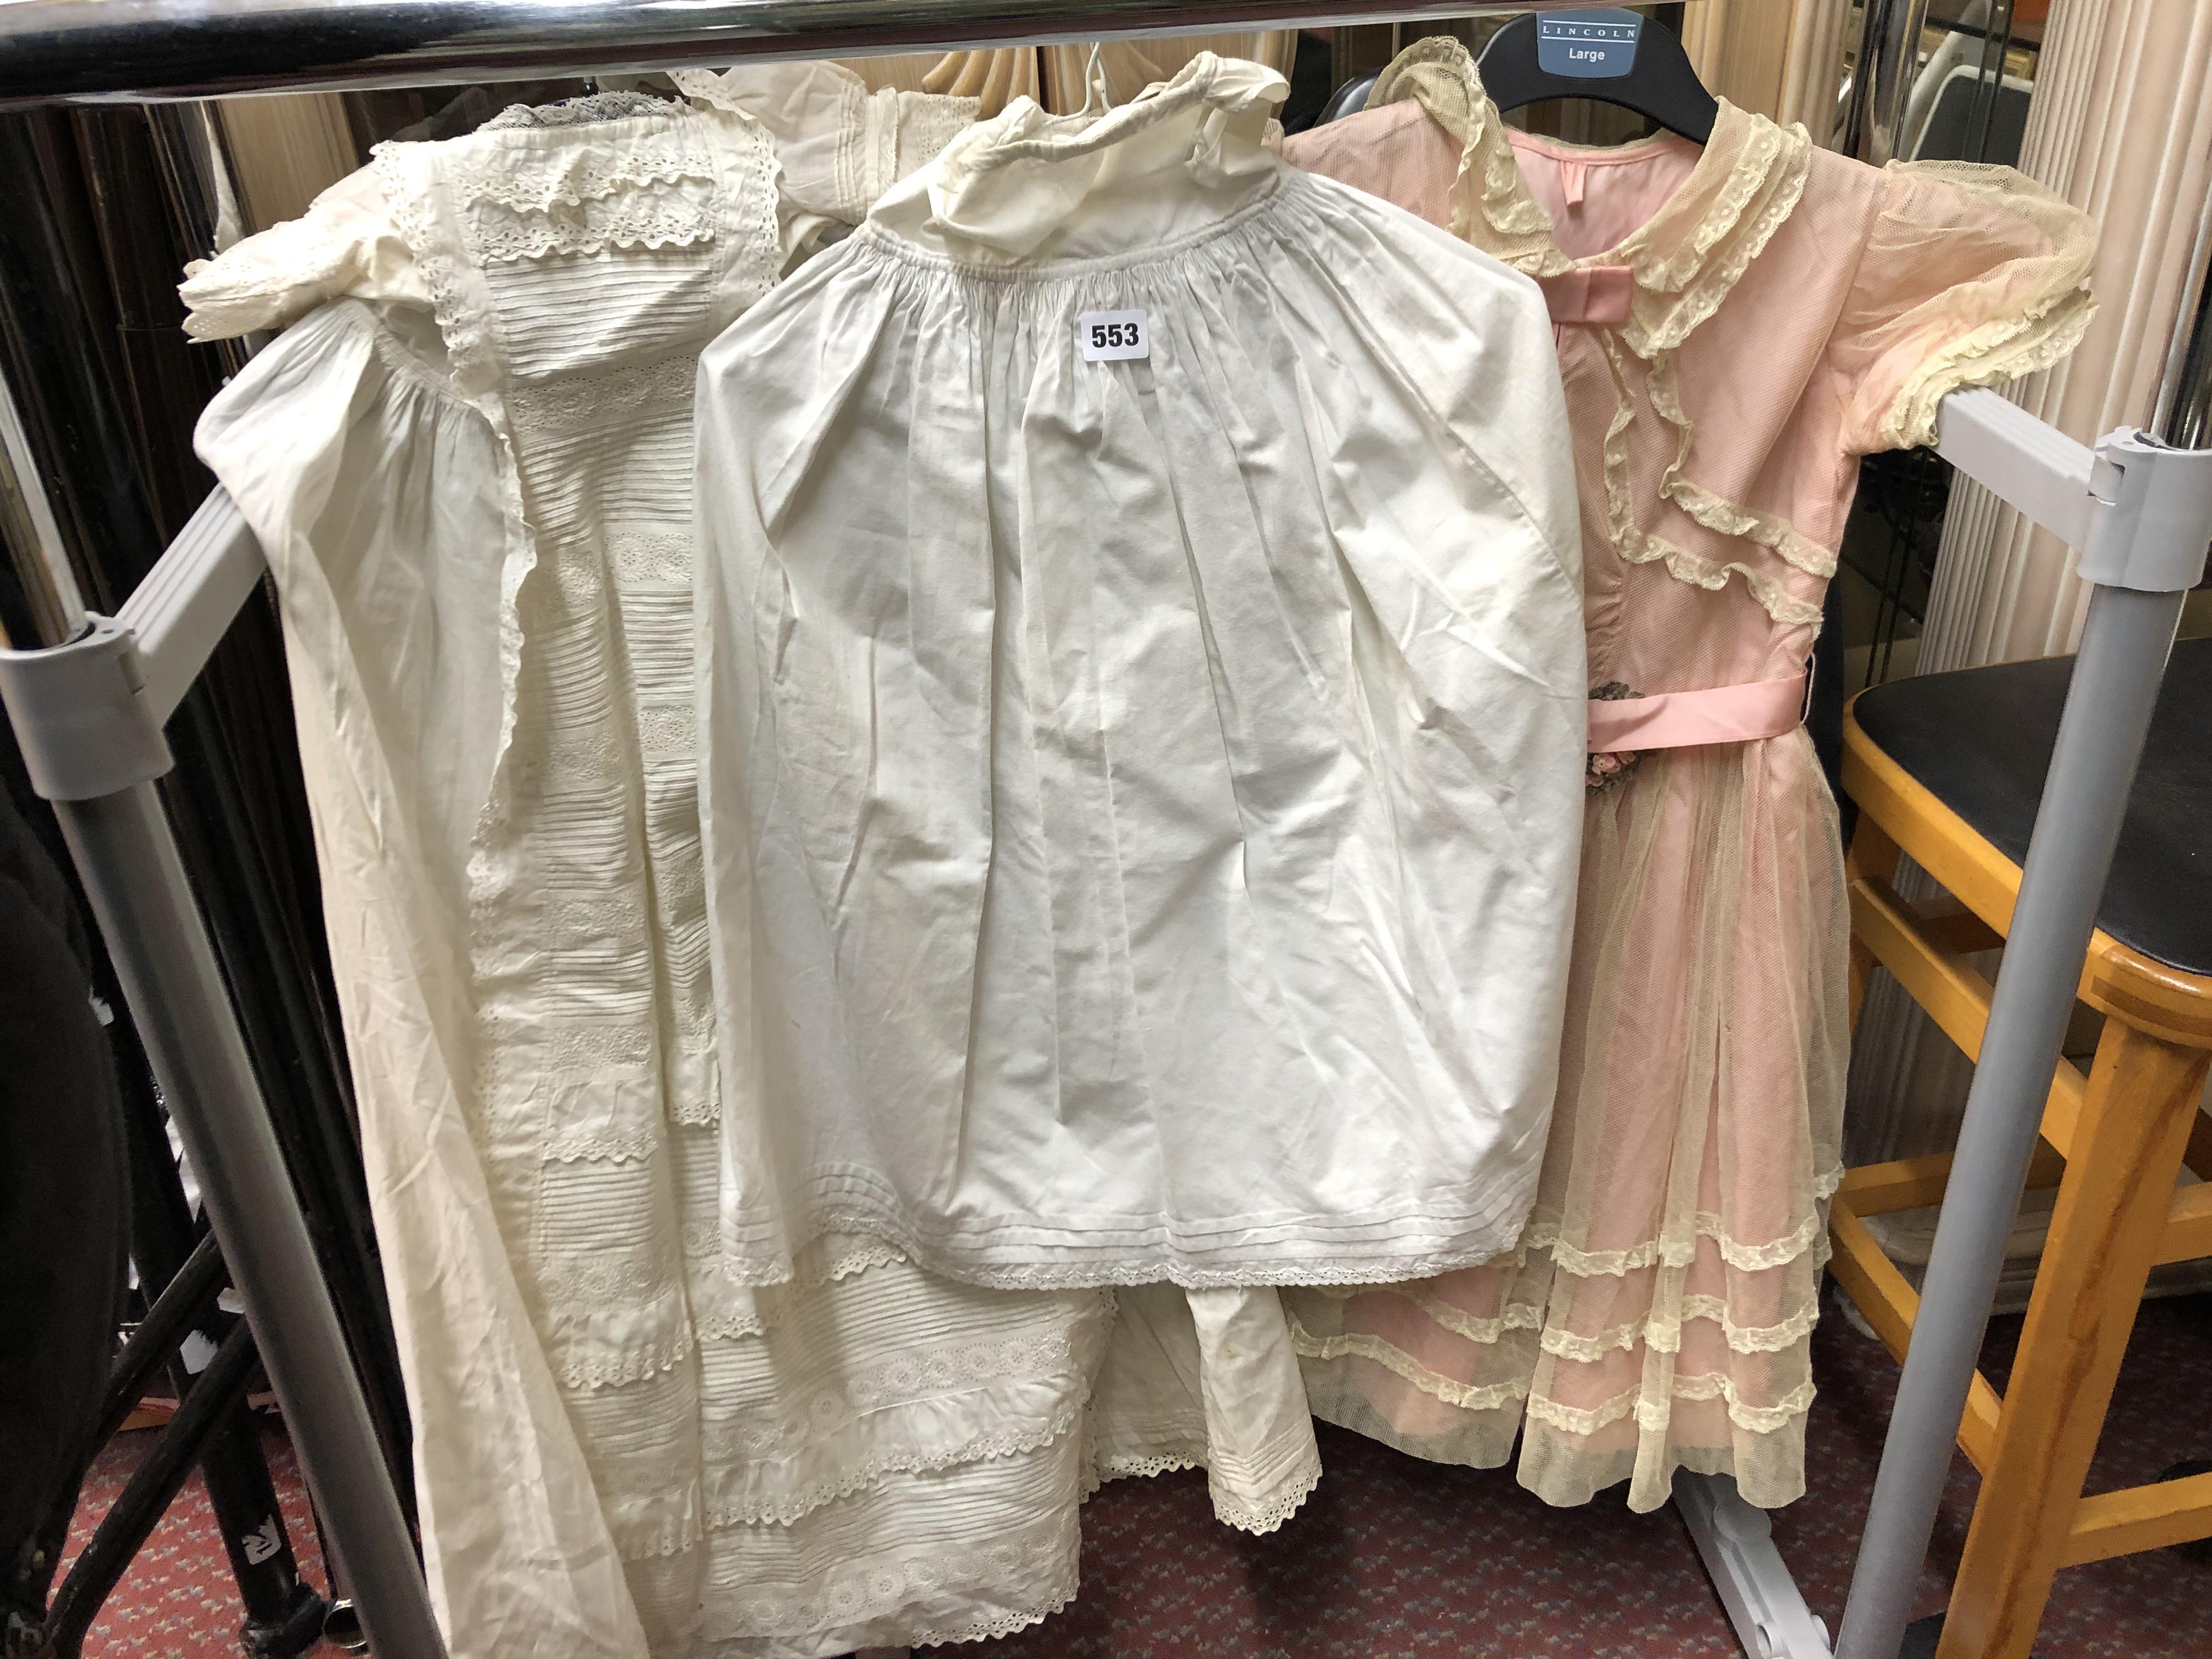 TWO EARLY 20TH CENTURY COTTON CHRISTENING TYPE GOWNS AND A DRESS